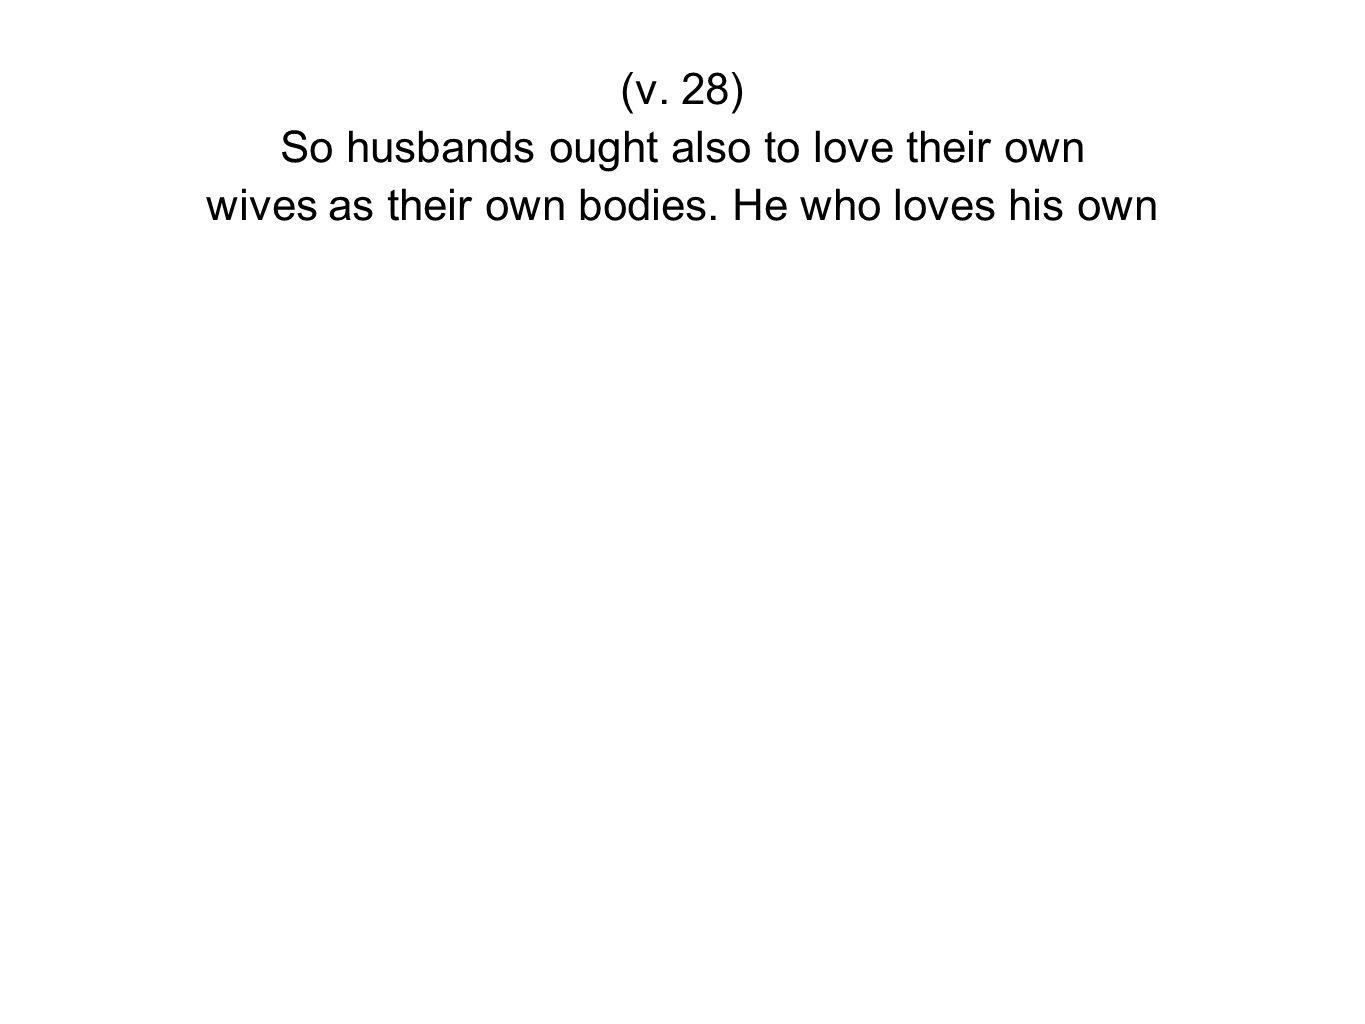 (v. 28) So husbands ought also to love their own wives as their own bodies. He who loves his own